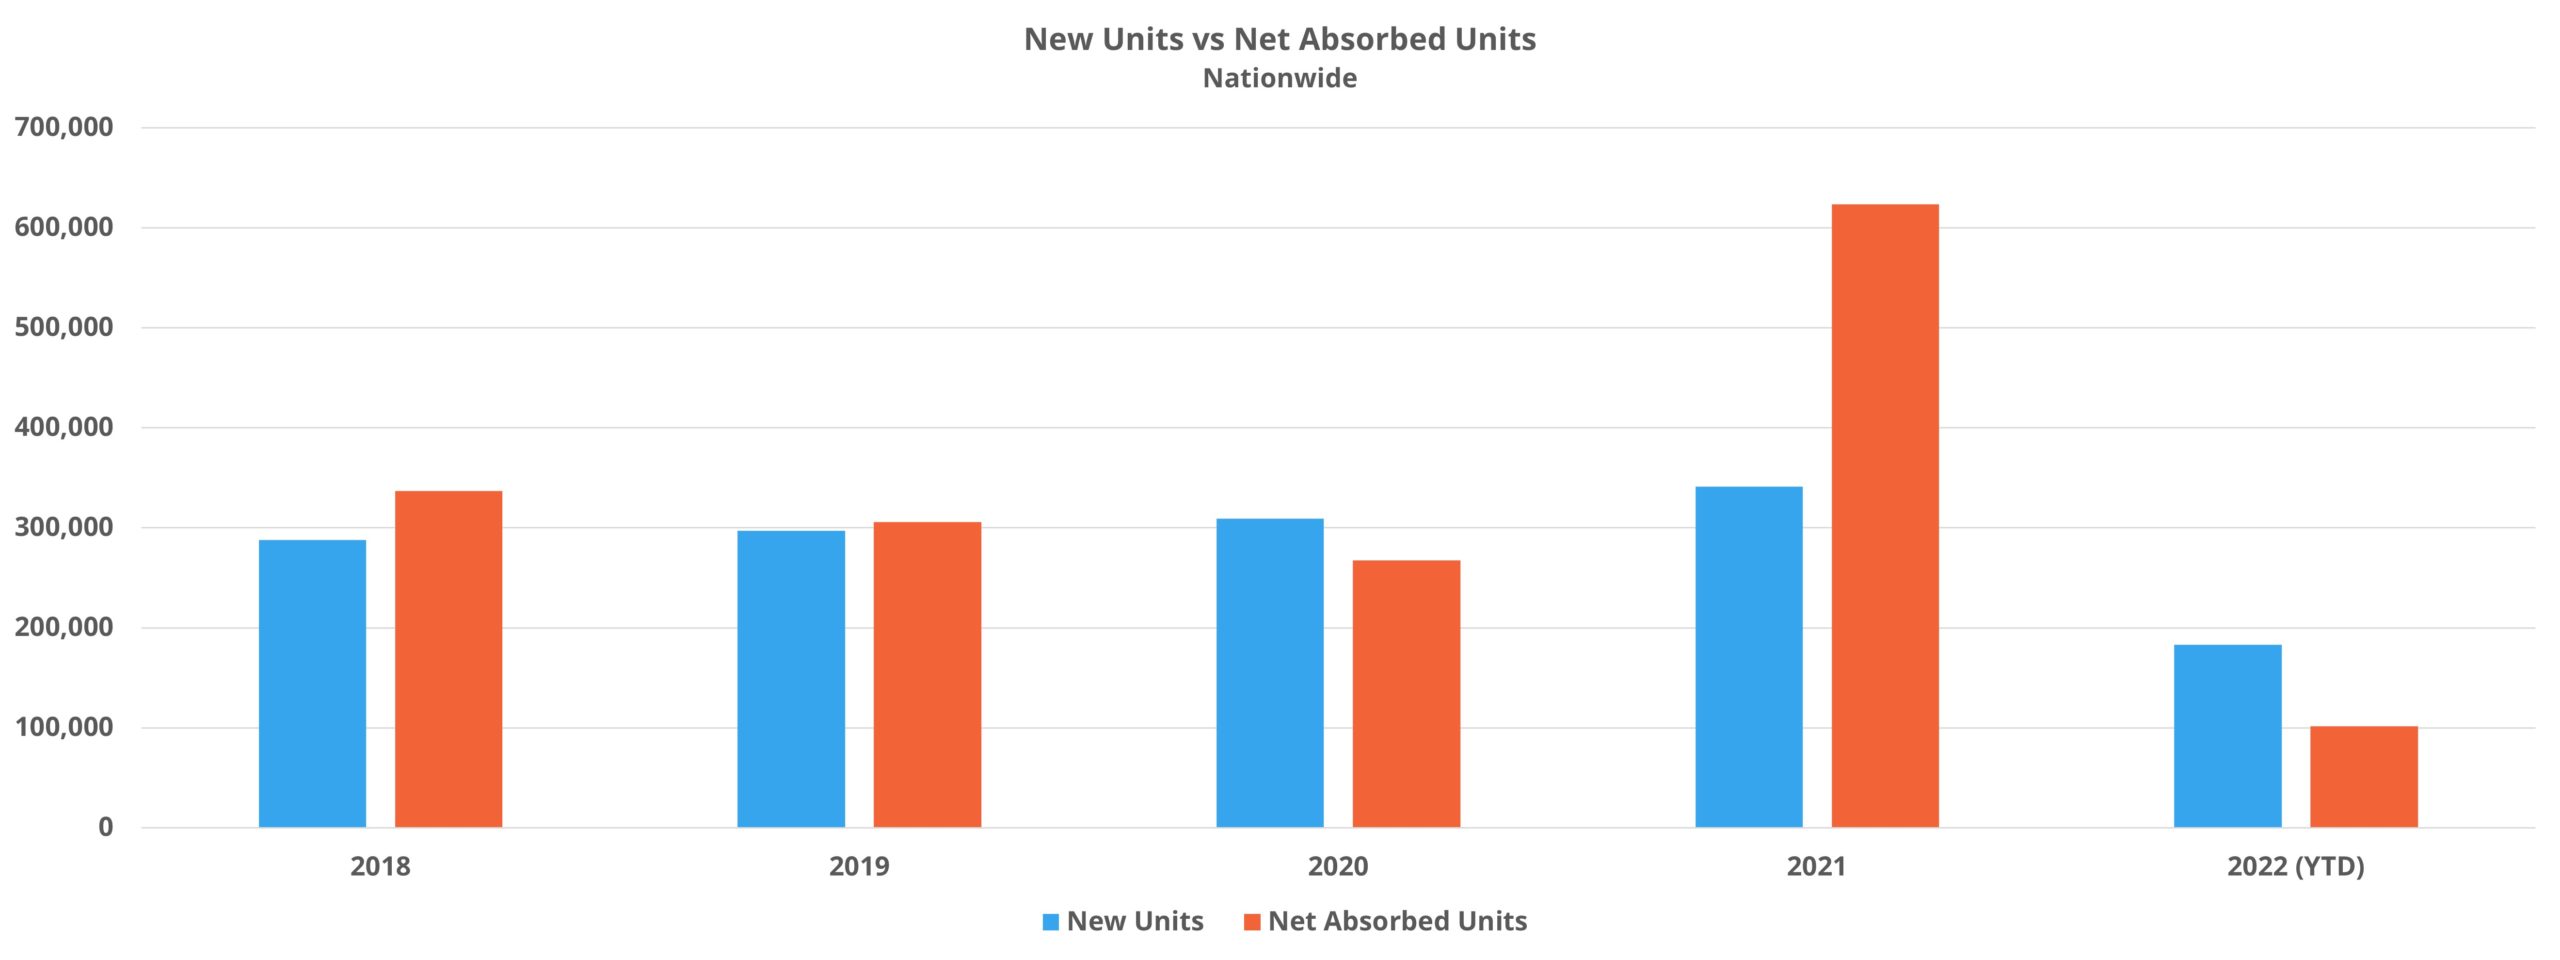 New Units vs Net Absorbed Units